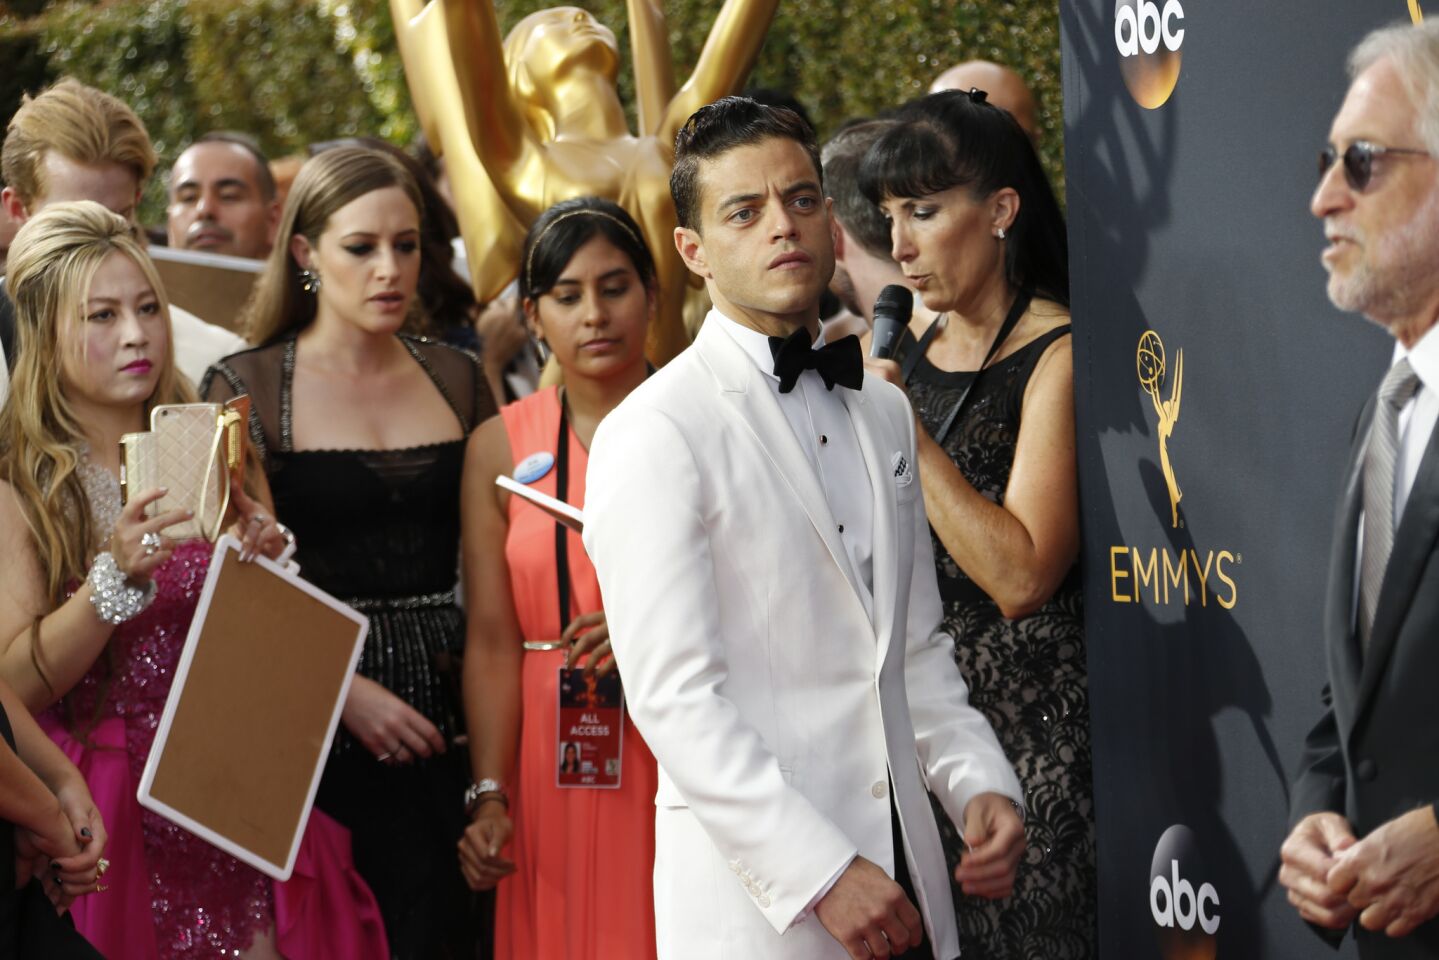 Lead actor in a drama series nominee Rami Malek of "Mr. Robot"